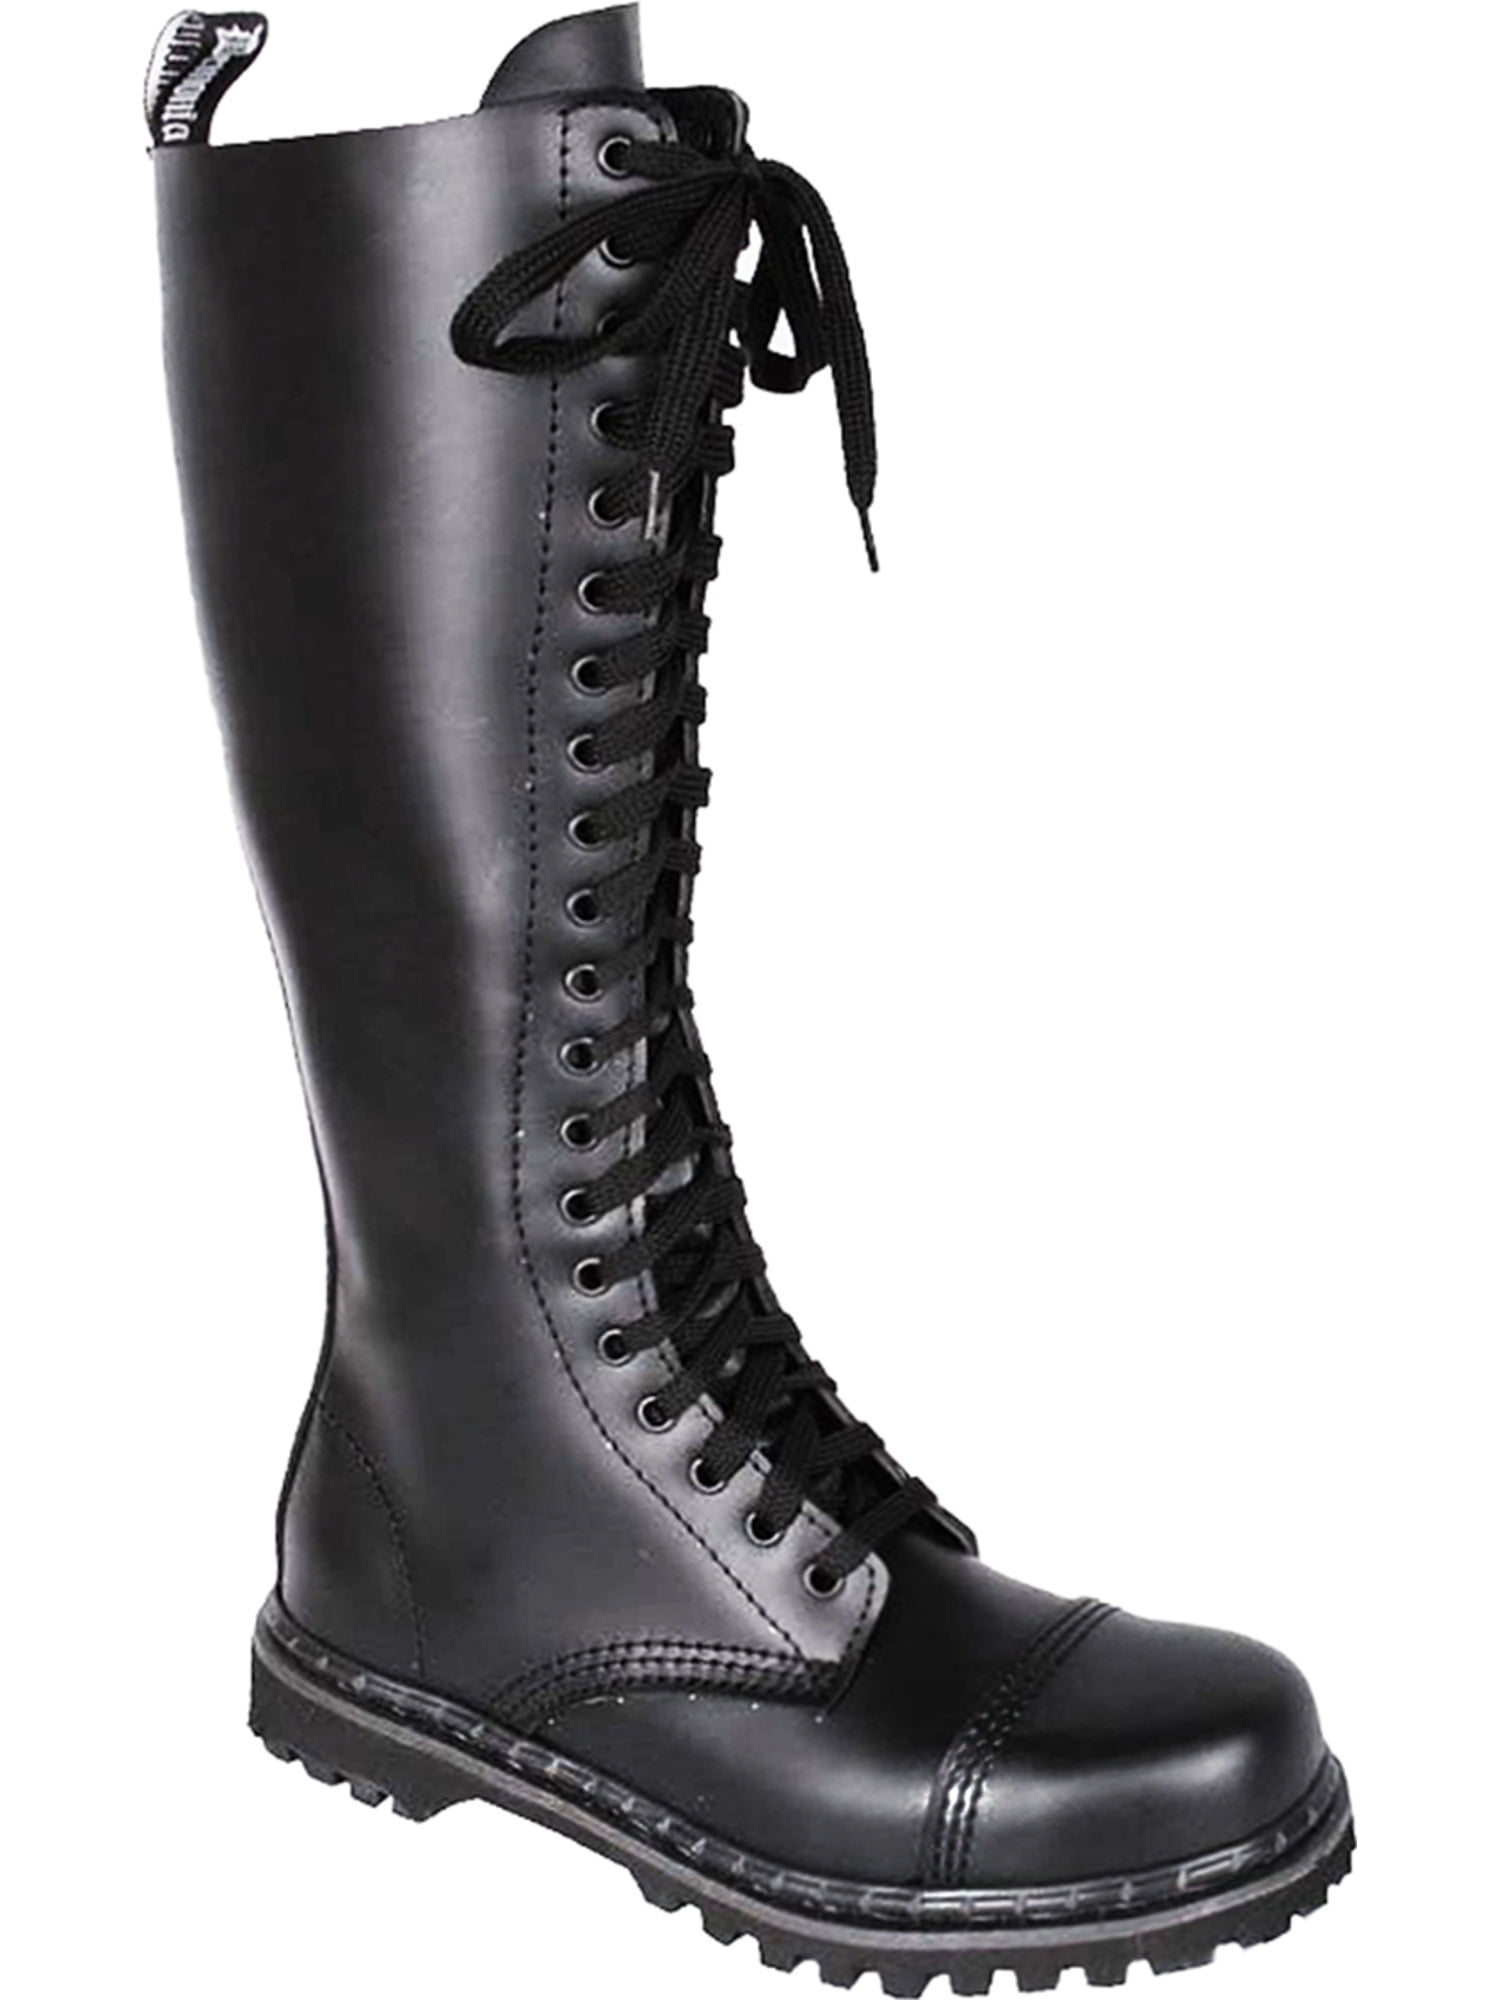 Summitfashions Mens Gothic Boots Lace Up Knee High Boot Black